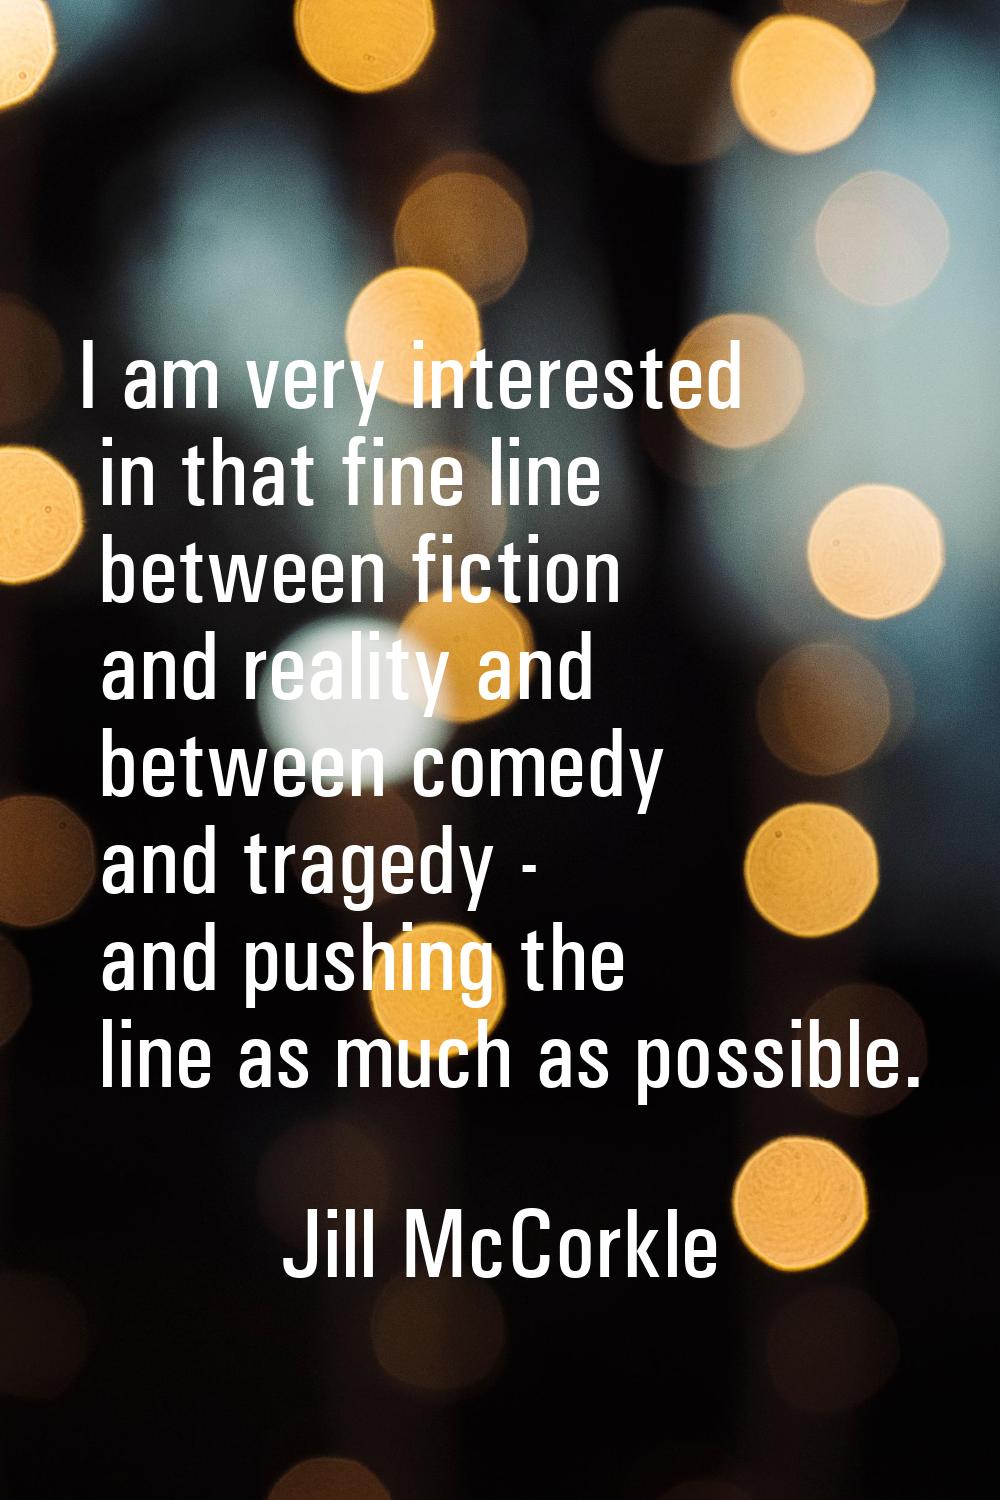 I am very interested in that fine line between fiction and reality and between comedy and tragedy -